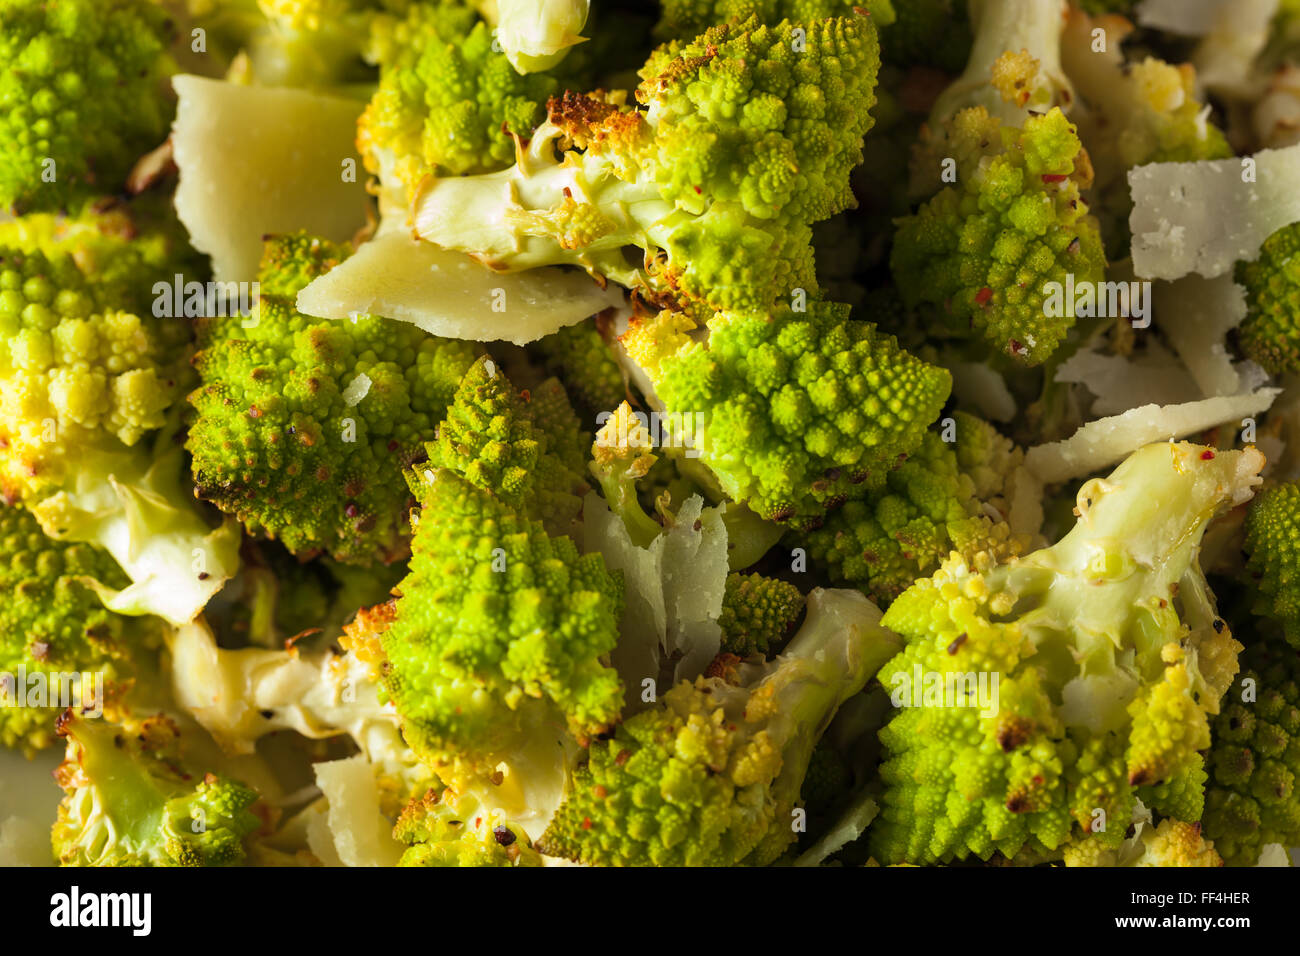 Organic Green Baked Romanesco with Cheese and Pepper Stock Photo